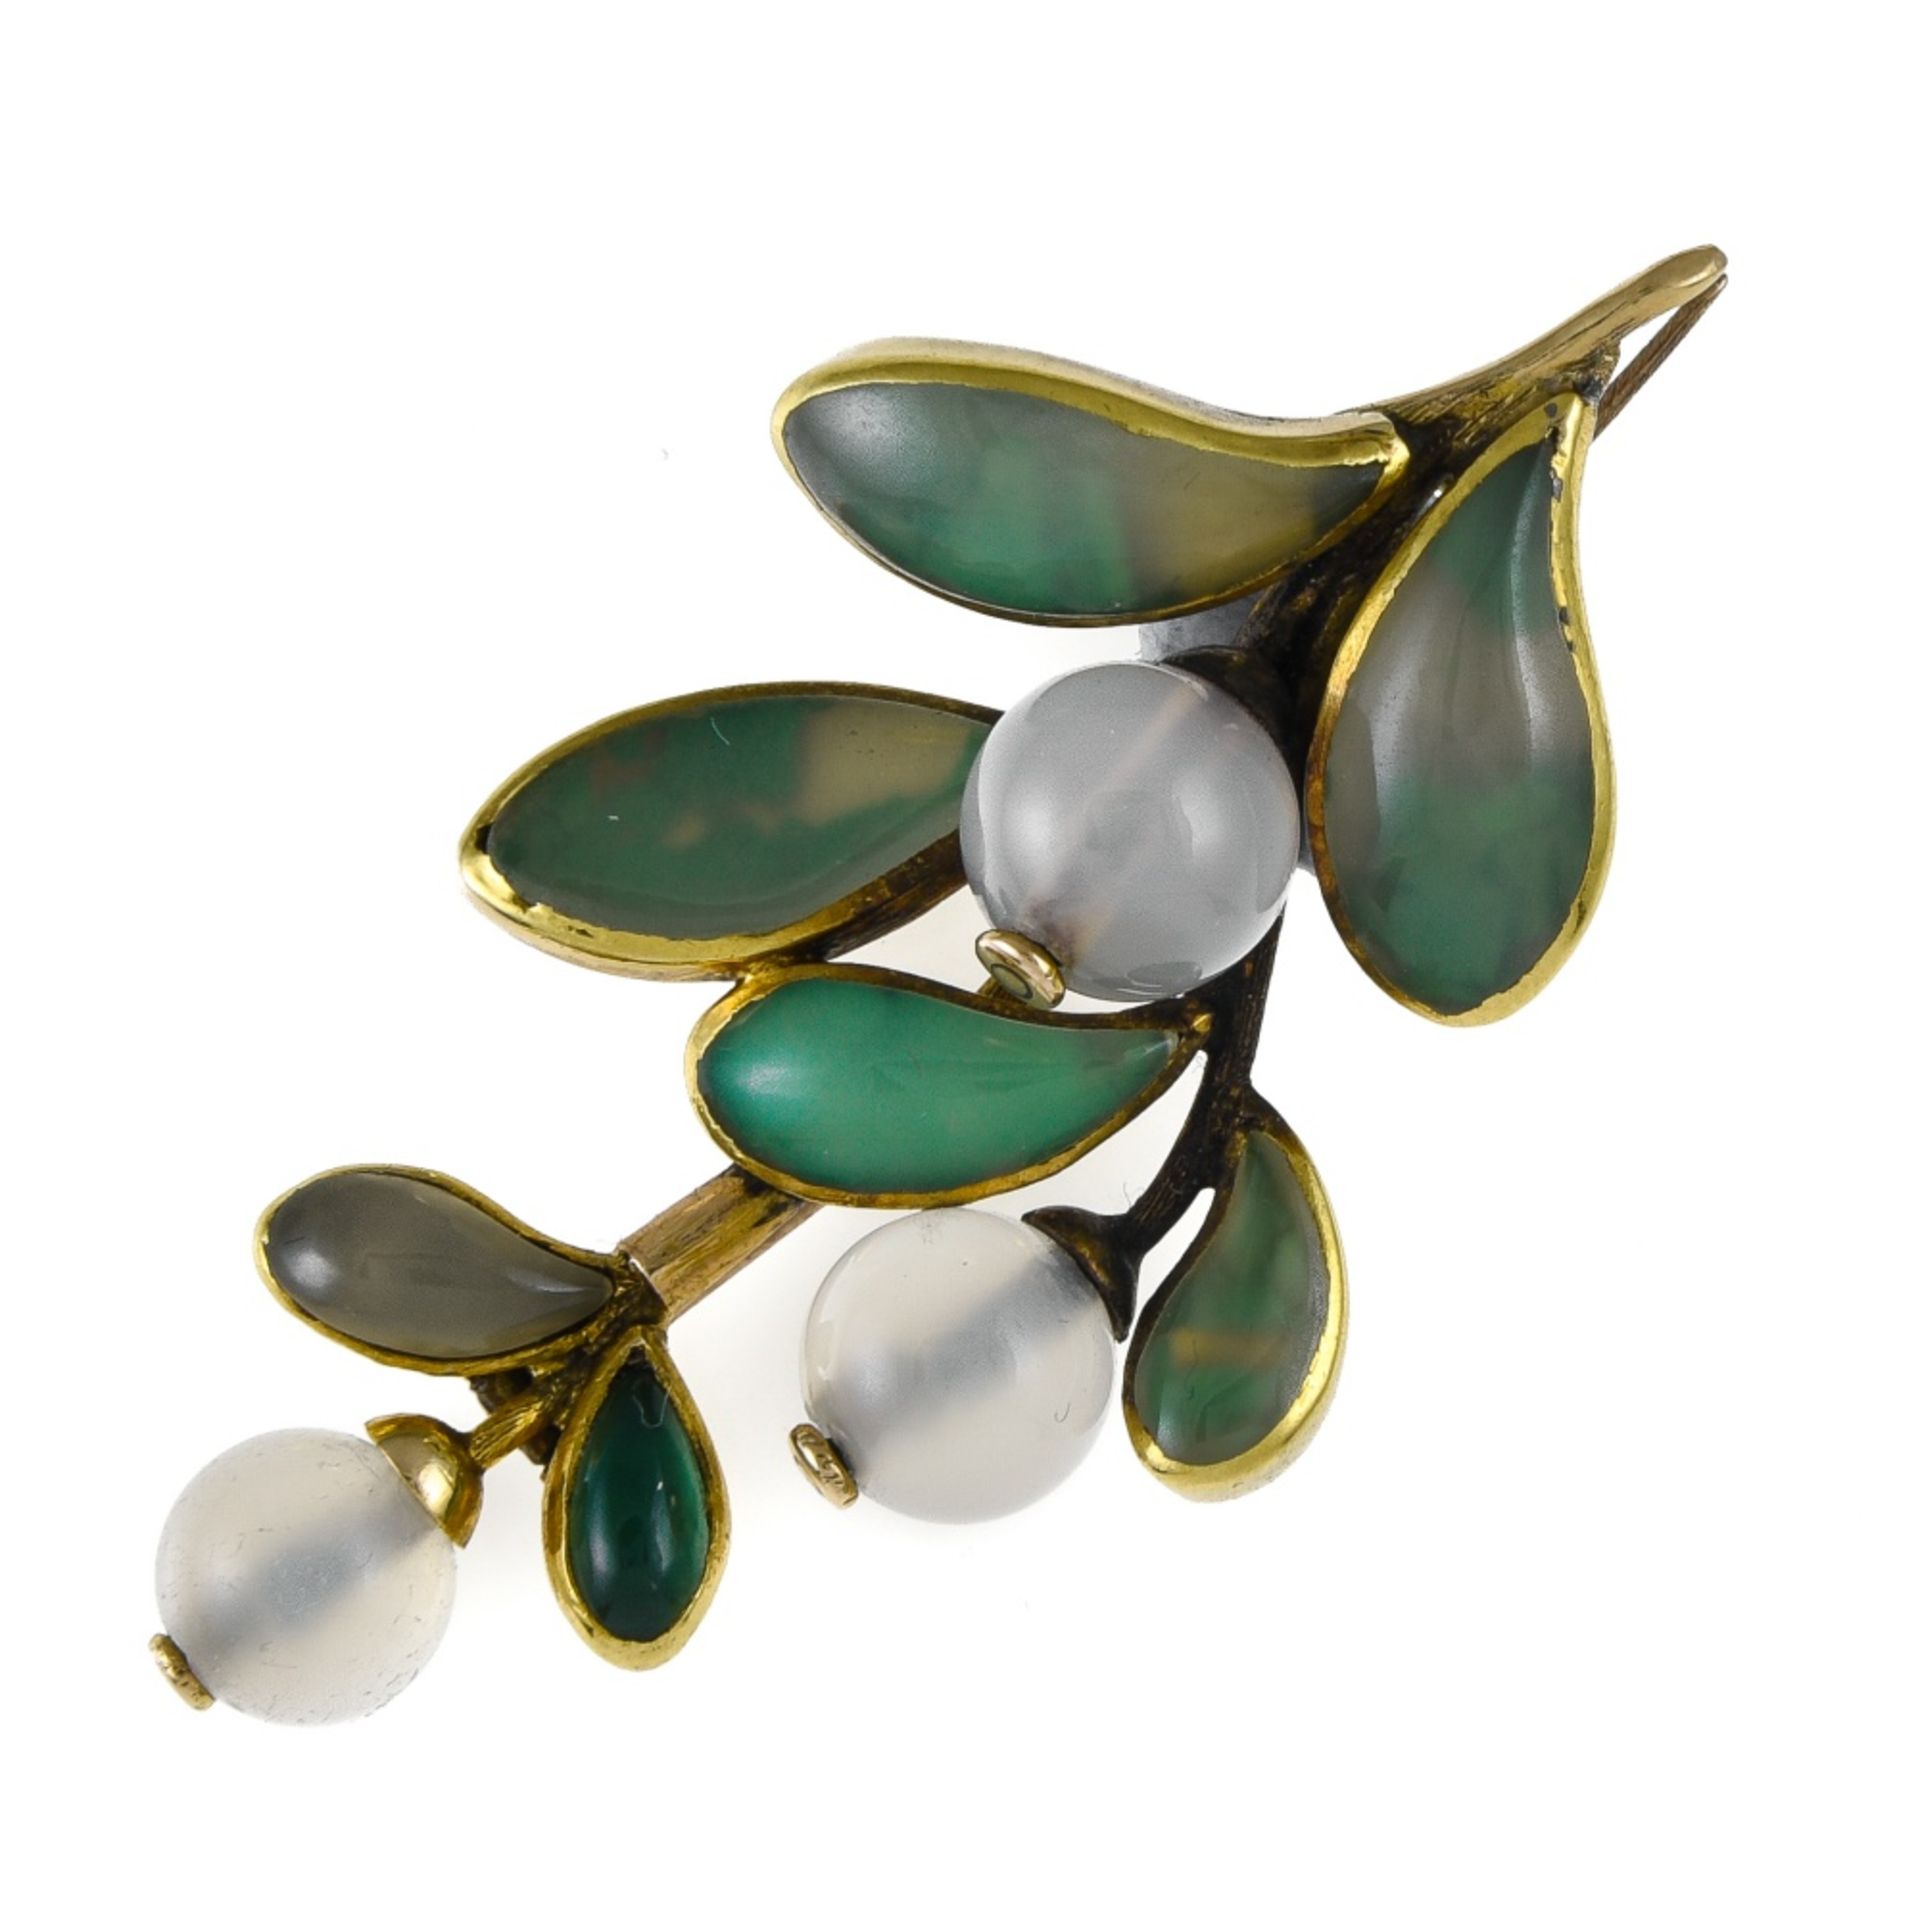 Victorian brooch 14 kt yellow gold depicting a branch of mistletoe set with 3 white agate balls and